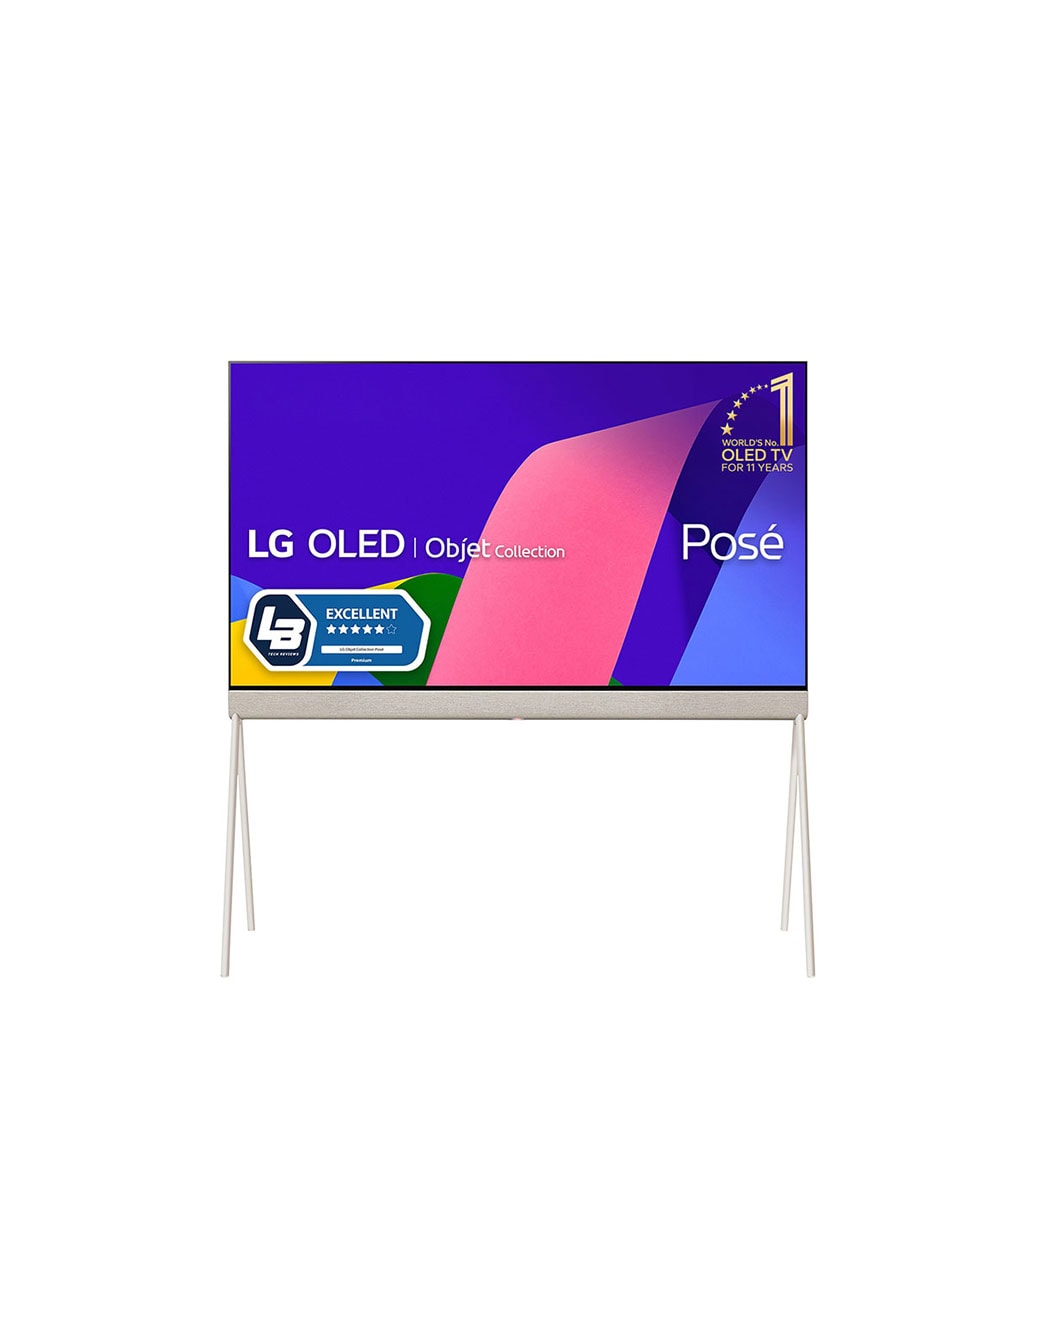 LG OLED | Objet Collection Posé | LG Suomi